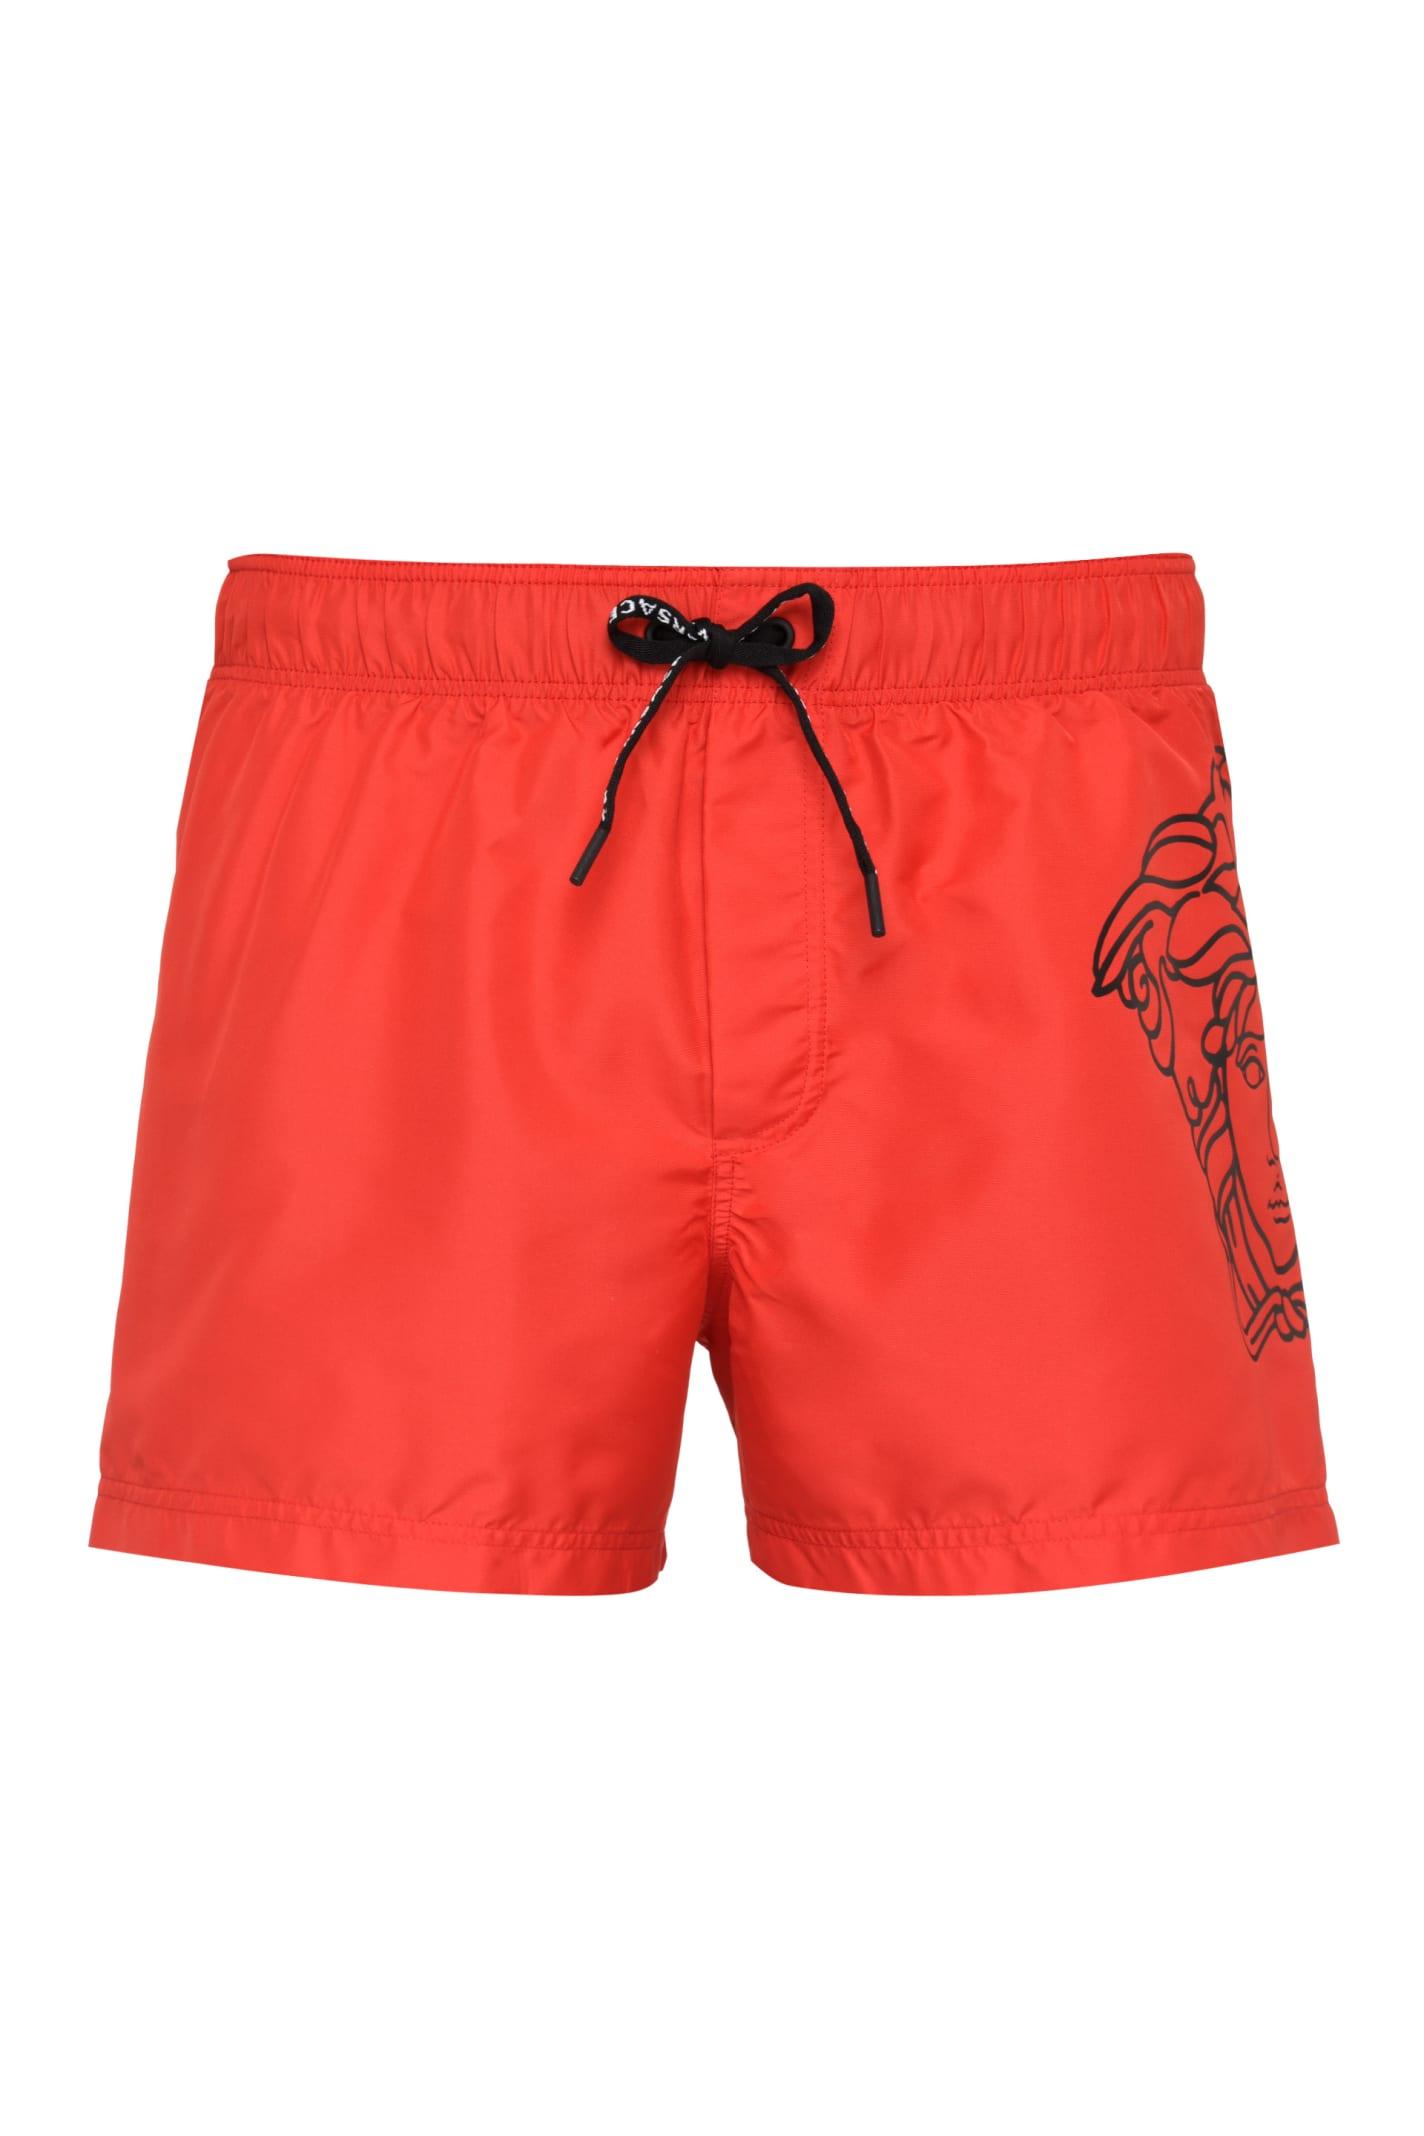 Versace Synthetic Medusa Swim Shorts in Red for Men - Lyst